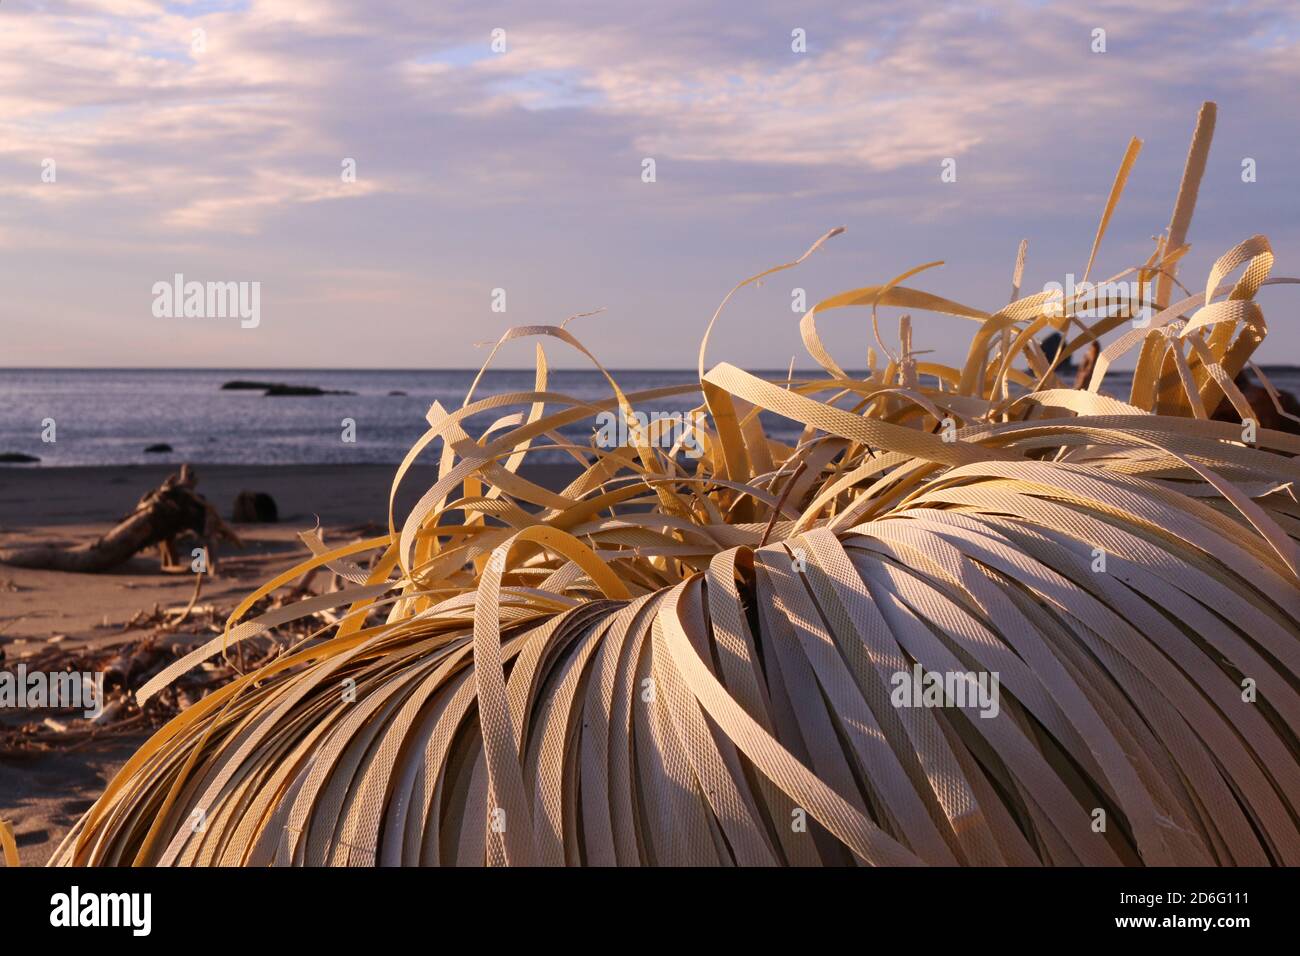 Yellow plastic straps washed up on a beach. Ocean in background. Stock Photo